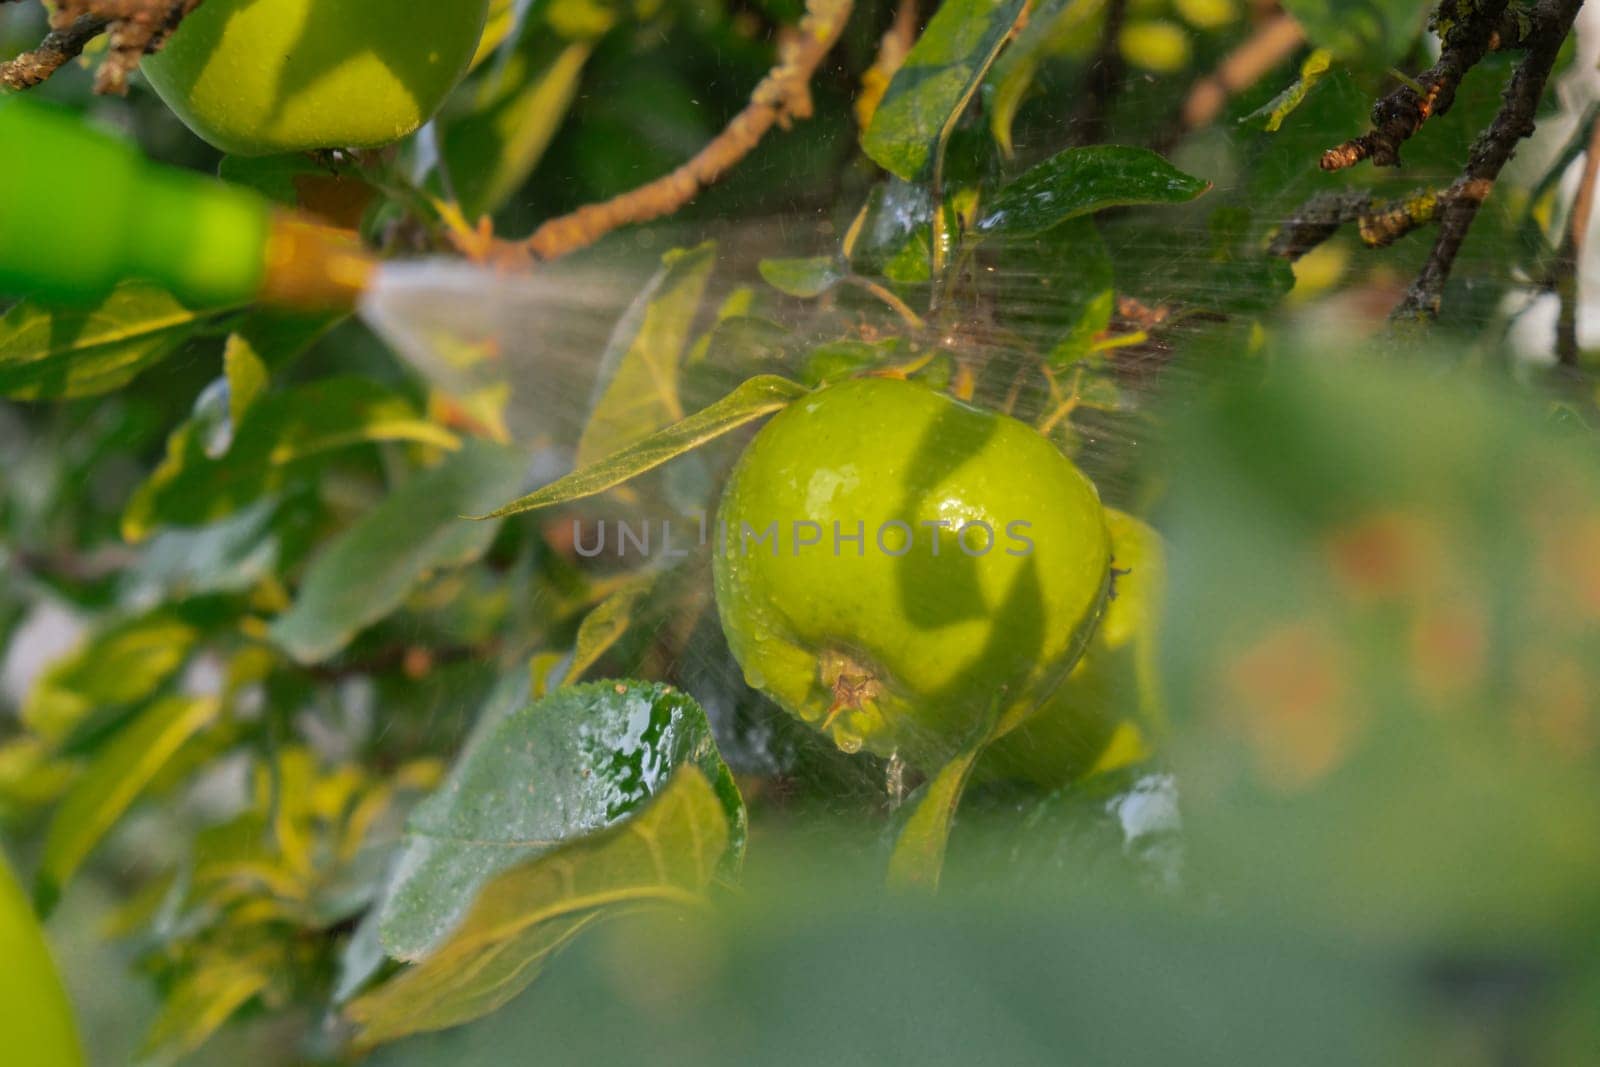 Spraying Chemicals Pesticides on green apple in outdoor garden. Concept of healthy eating homegrown greenery fruits. Seasonal countryside cottage core life by anna_stasiia